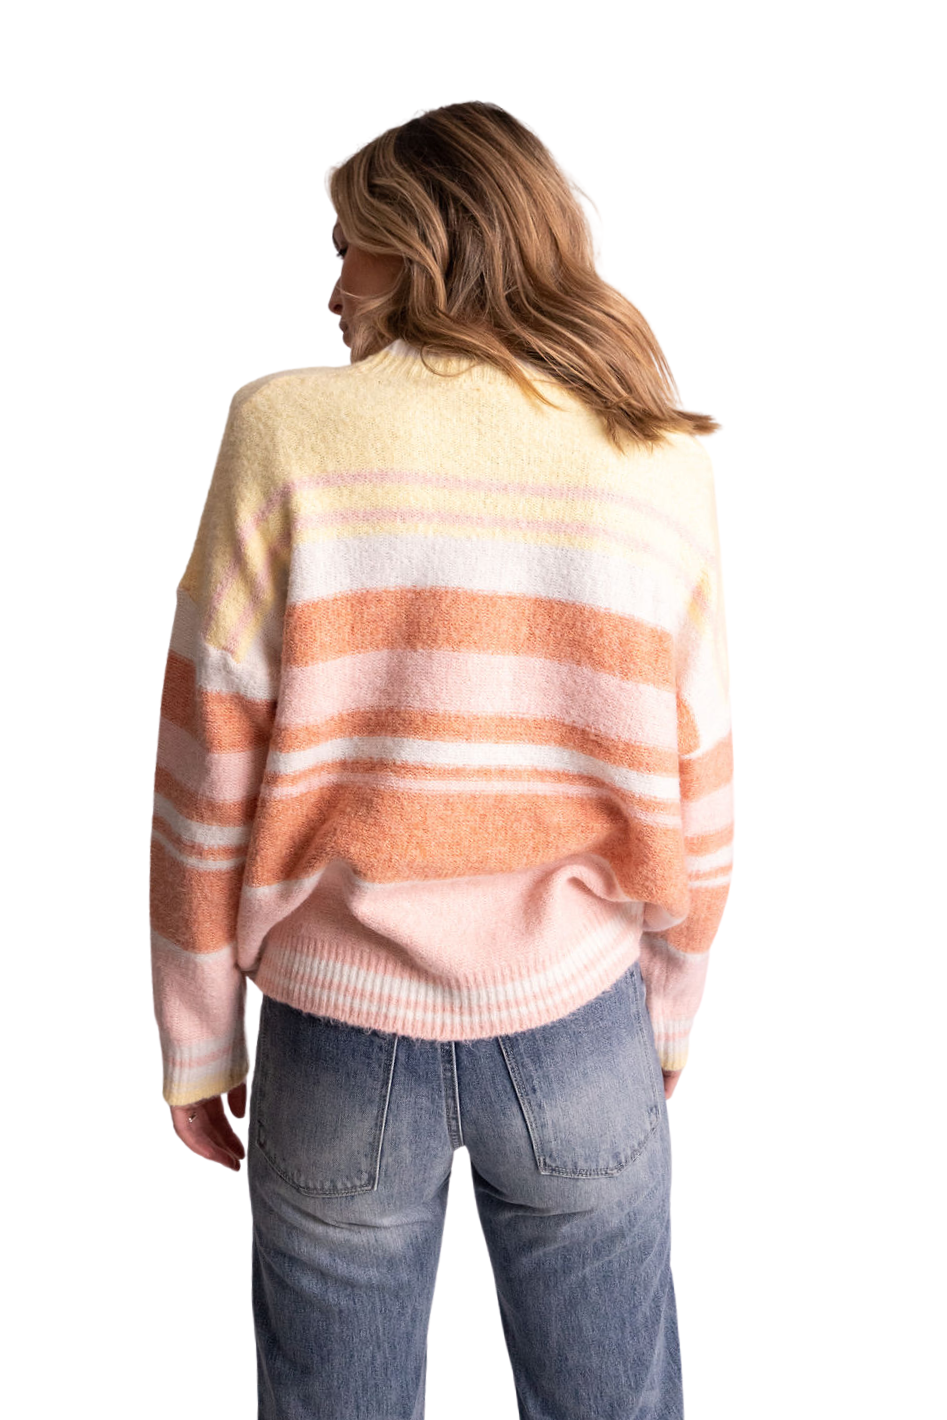 Dusty Pastel Candy Stripe Thin Knit Sweater - Expressive Collective CO.